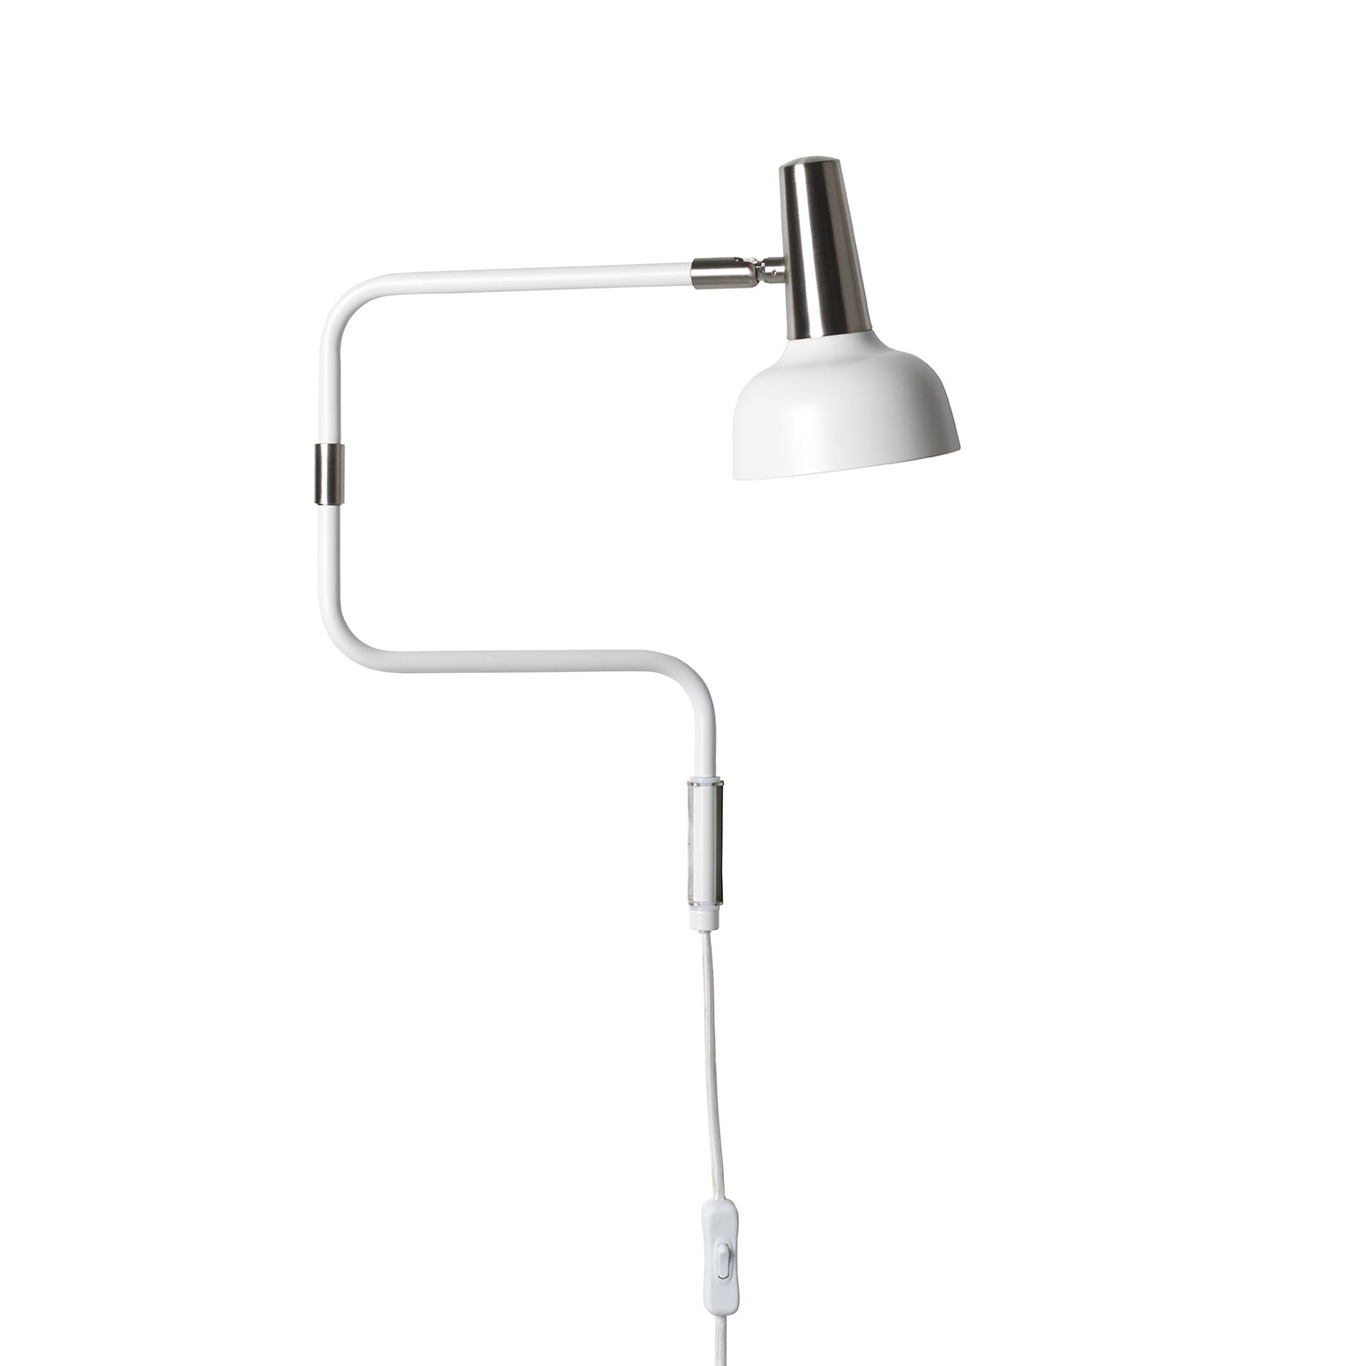 Ray Wandleuchte LED, Weiss/ Nickel